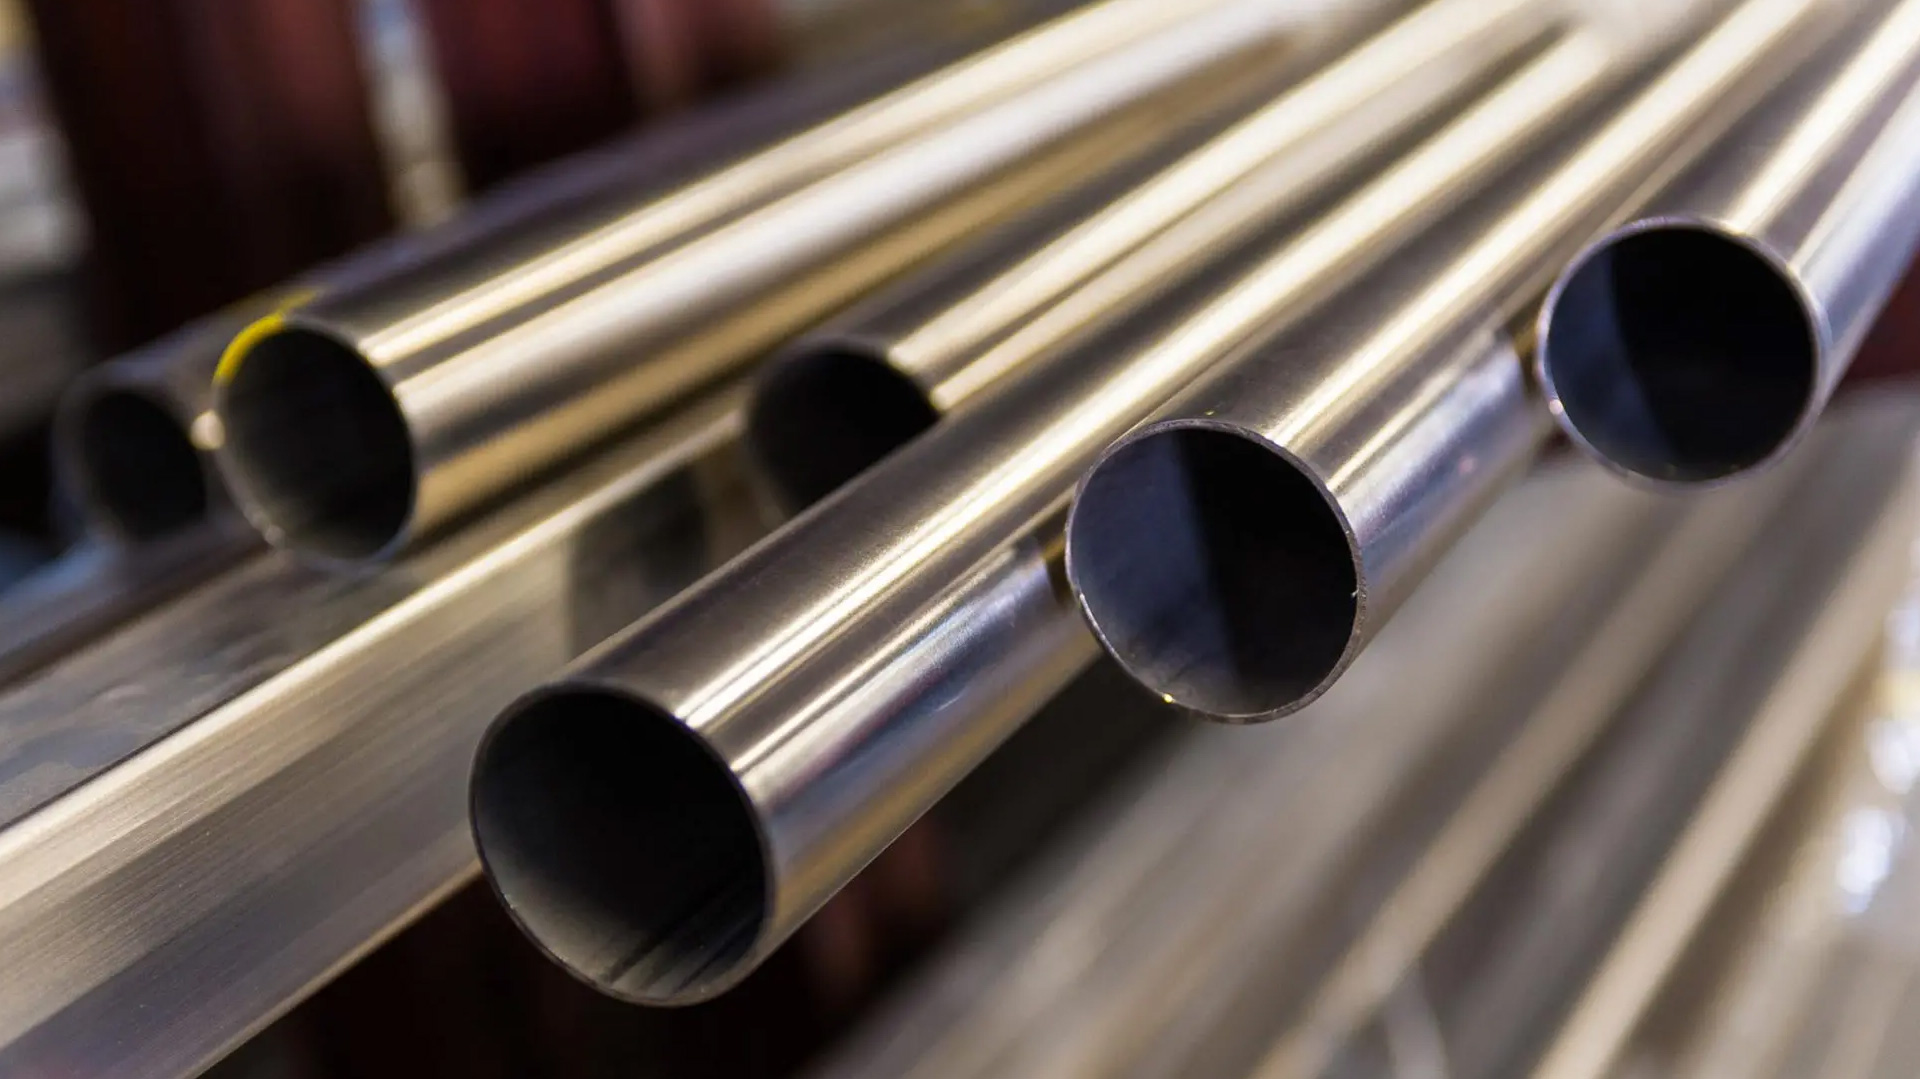 Stainless Steel 310 Pipes & Tubes